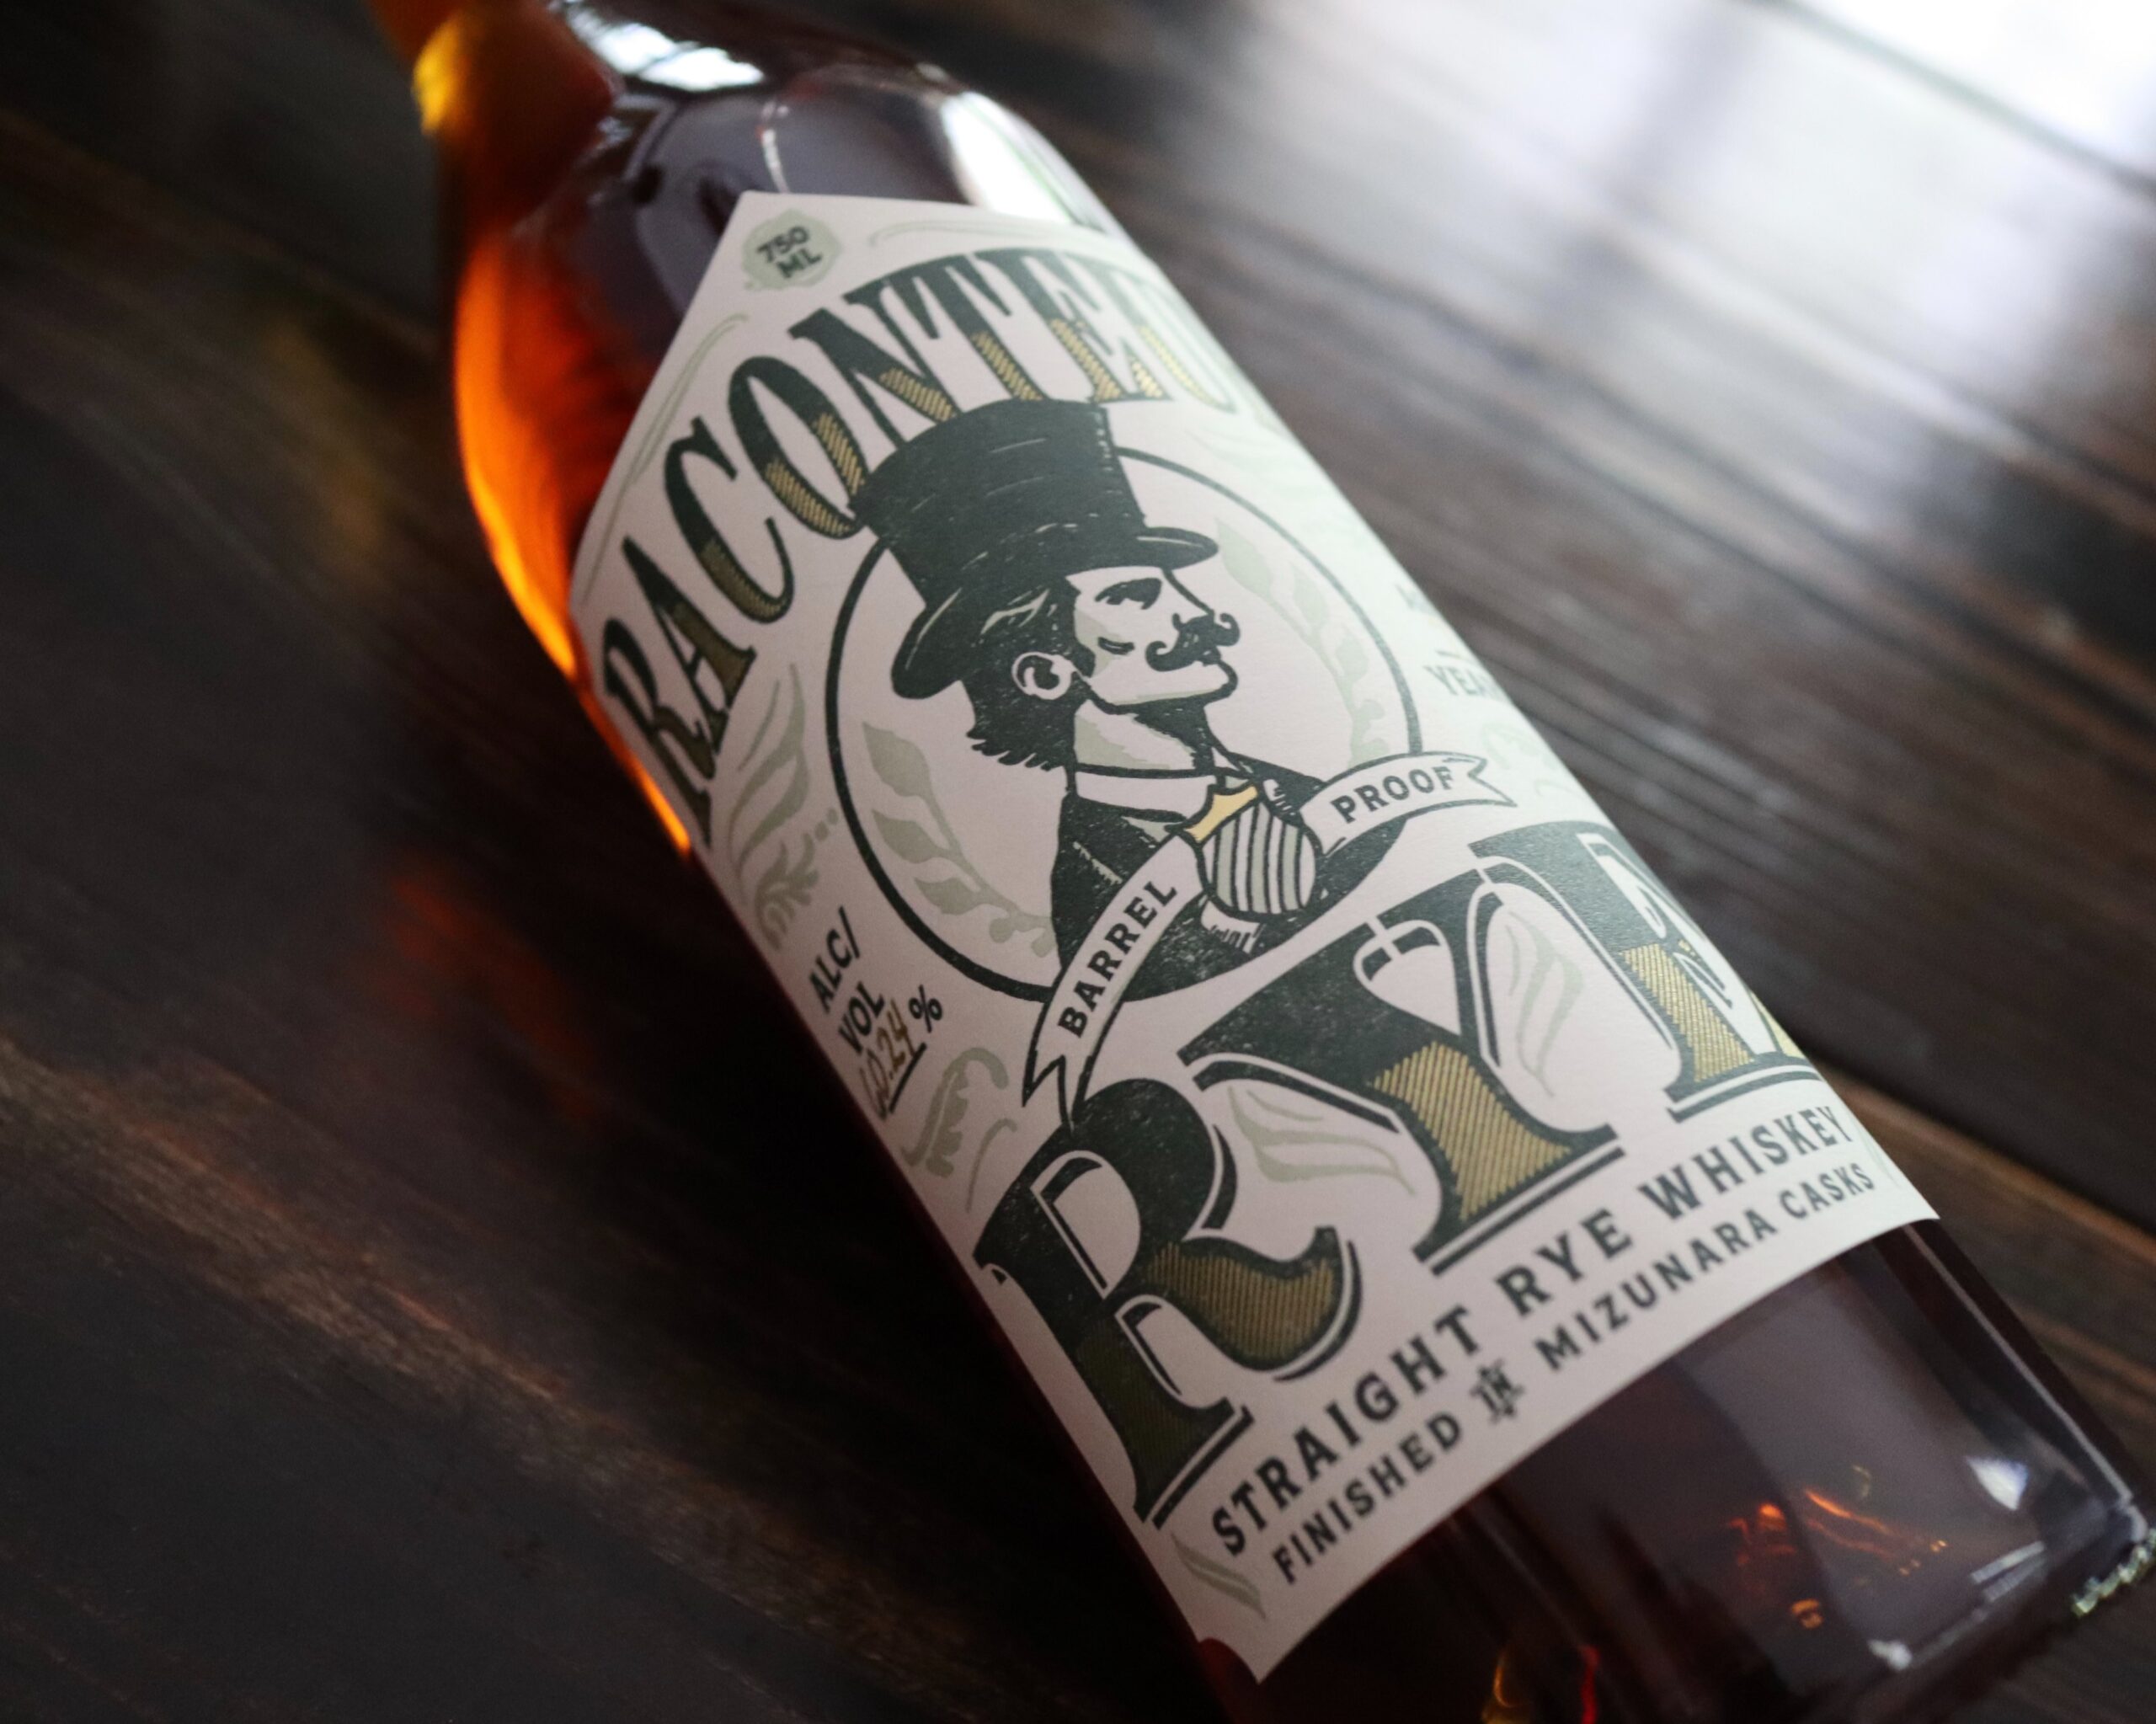 Inaugural Batch of Raconteur Rye Whiskey Introduced by Rare Bird 101